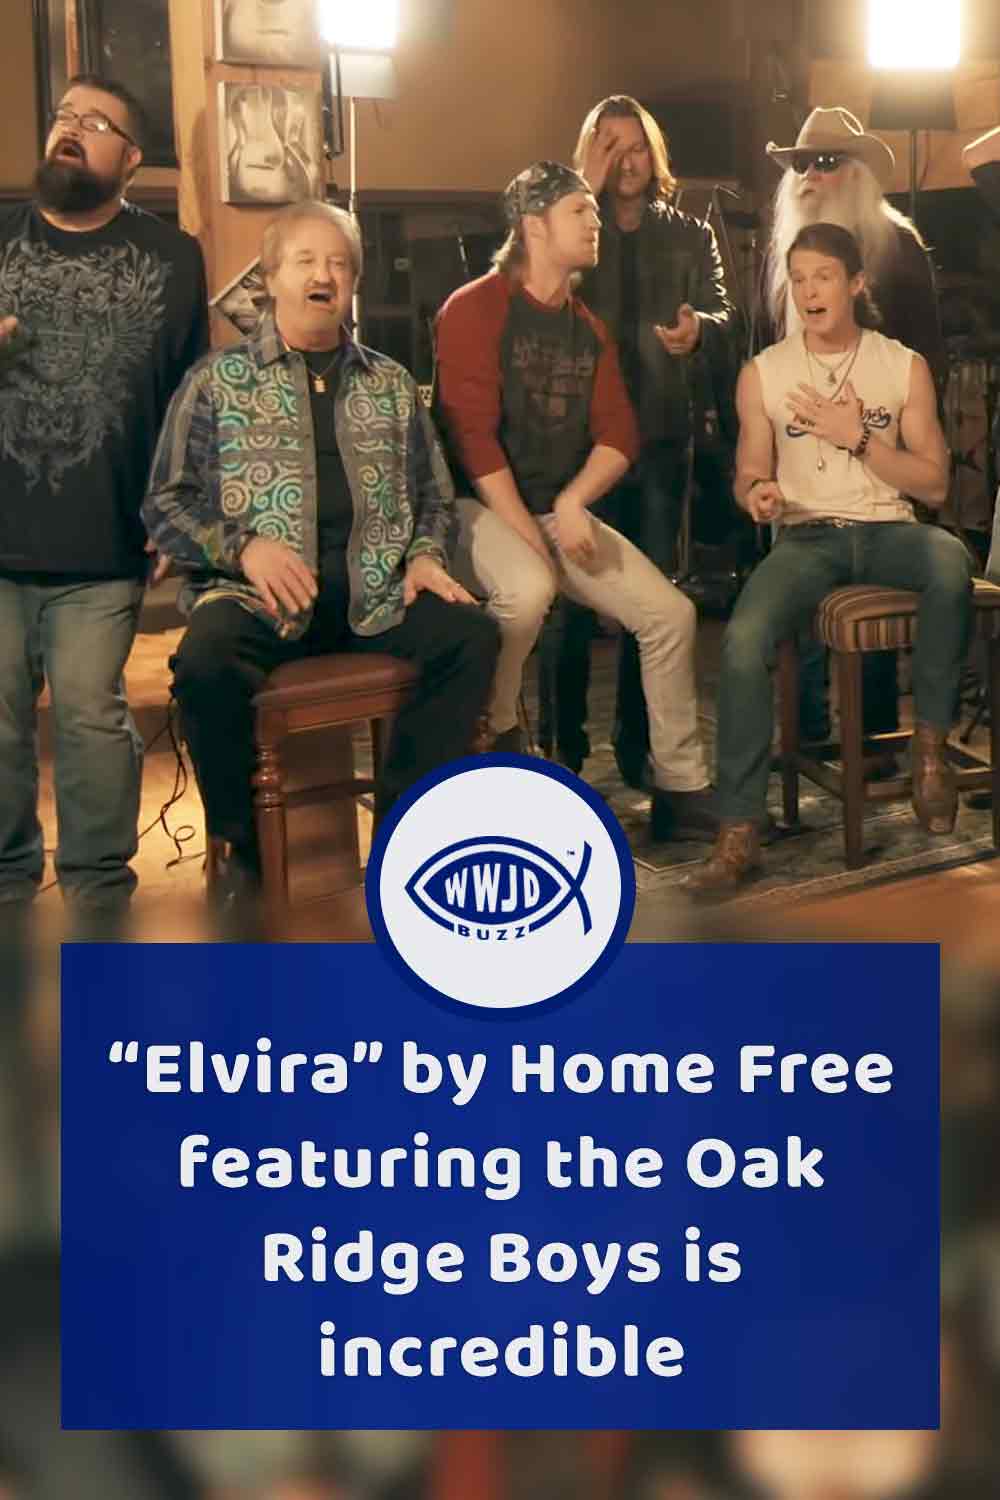 “Elvira” by Home Free featuring the Oak Ridge Boys is incredible